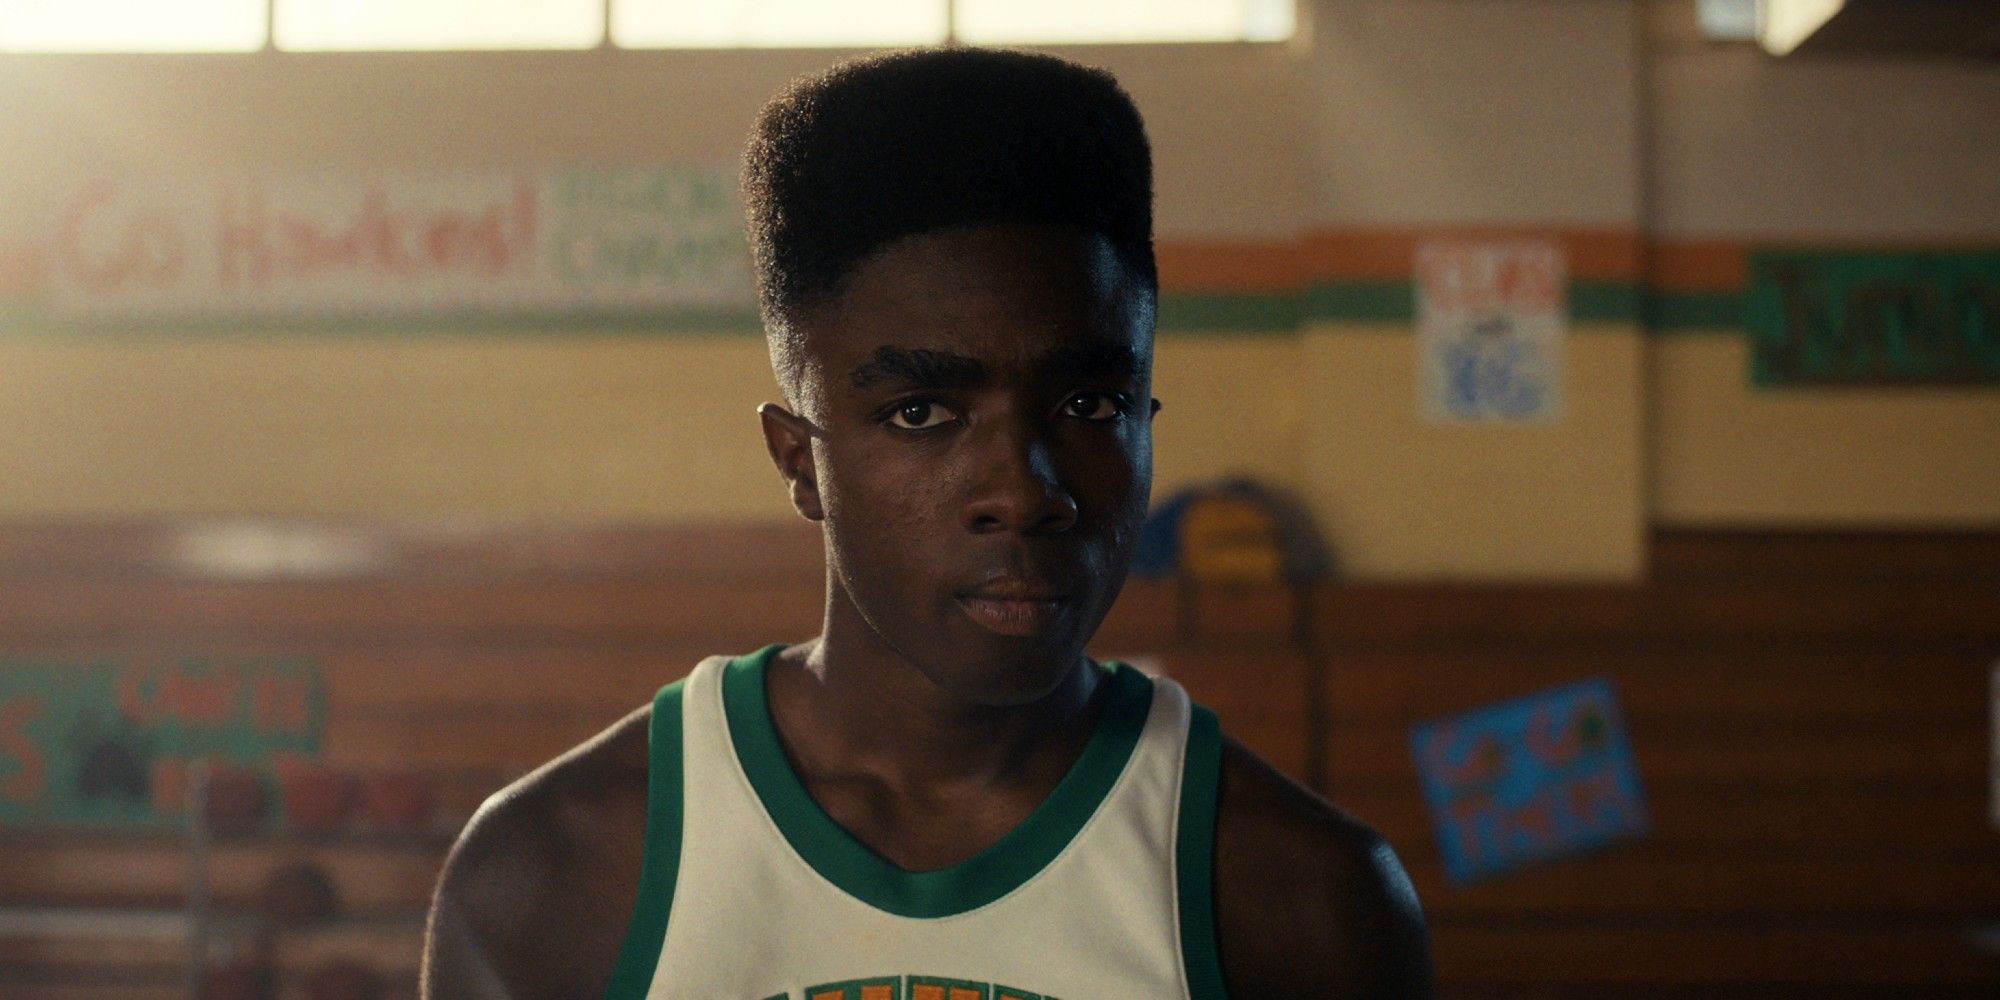 Lucas Sinclair portrayed by Caleb McLaughlin playing basketball